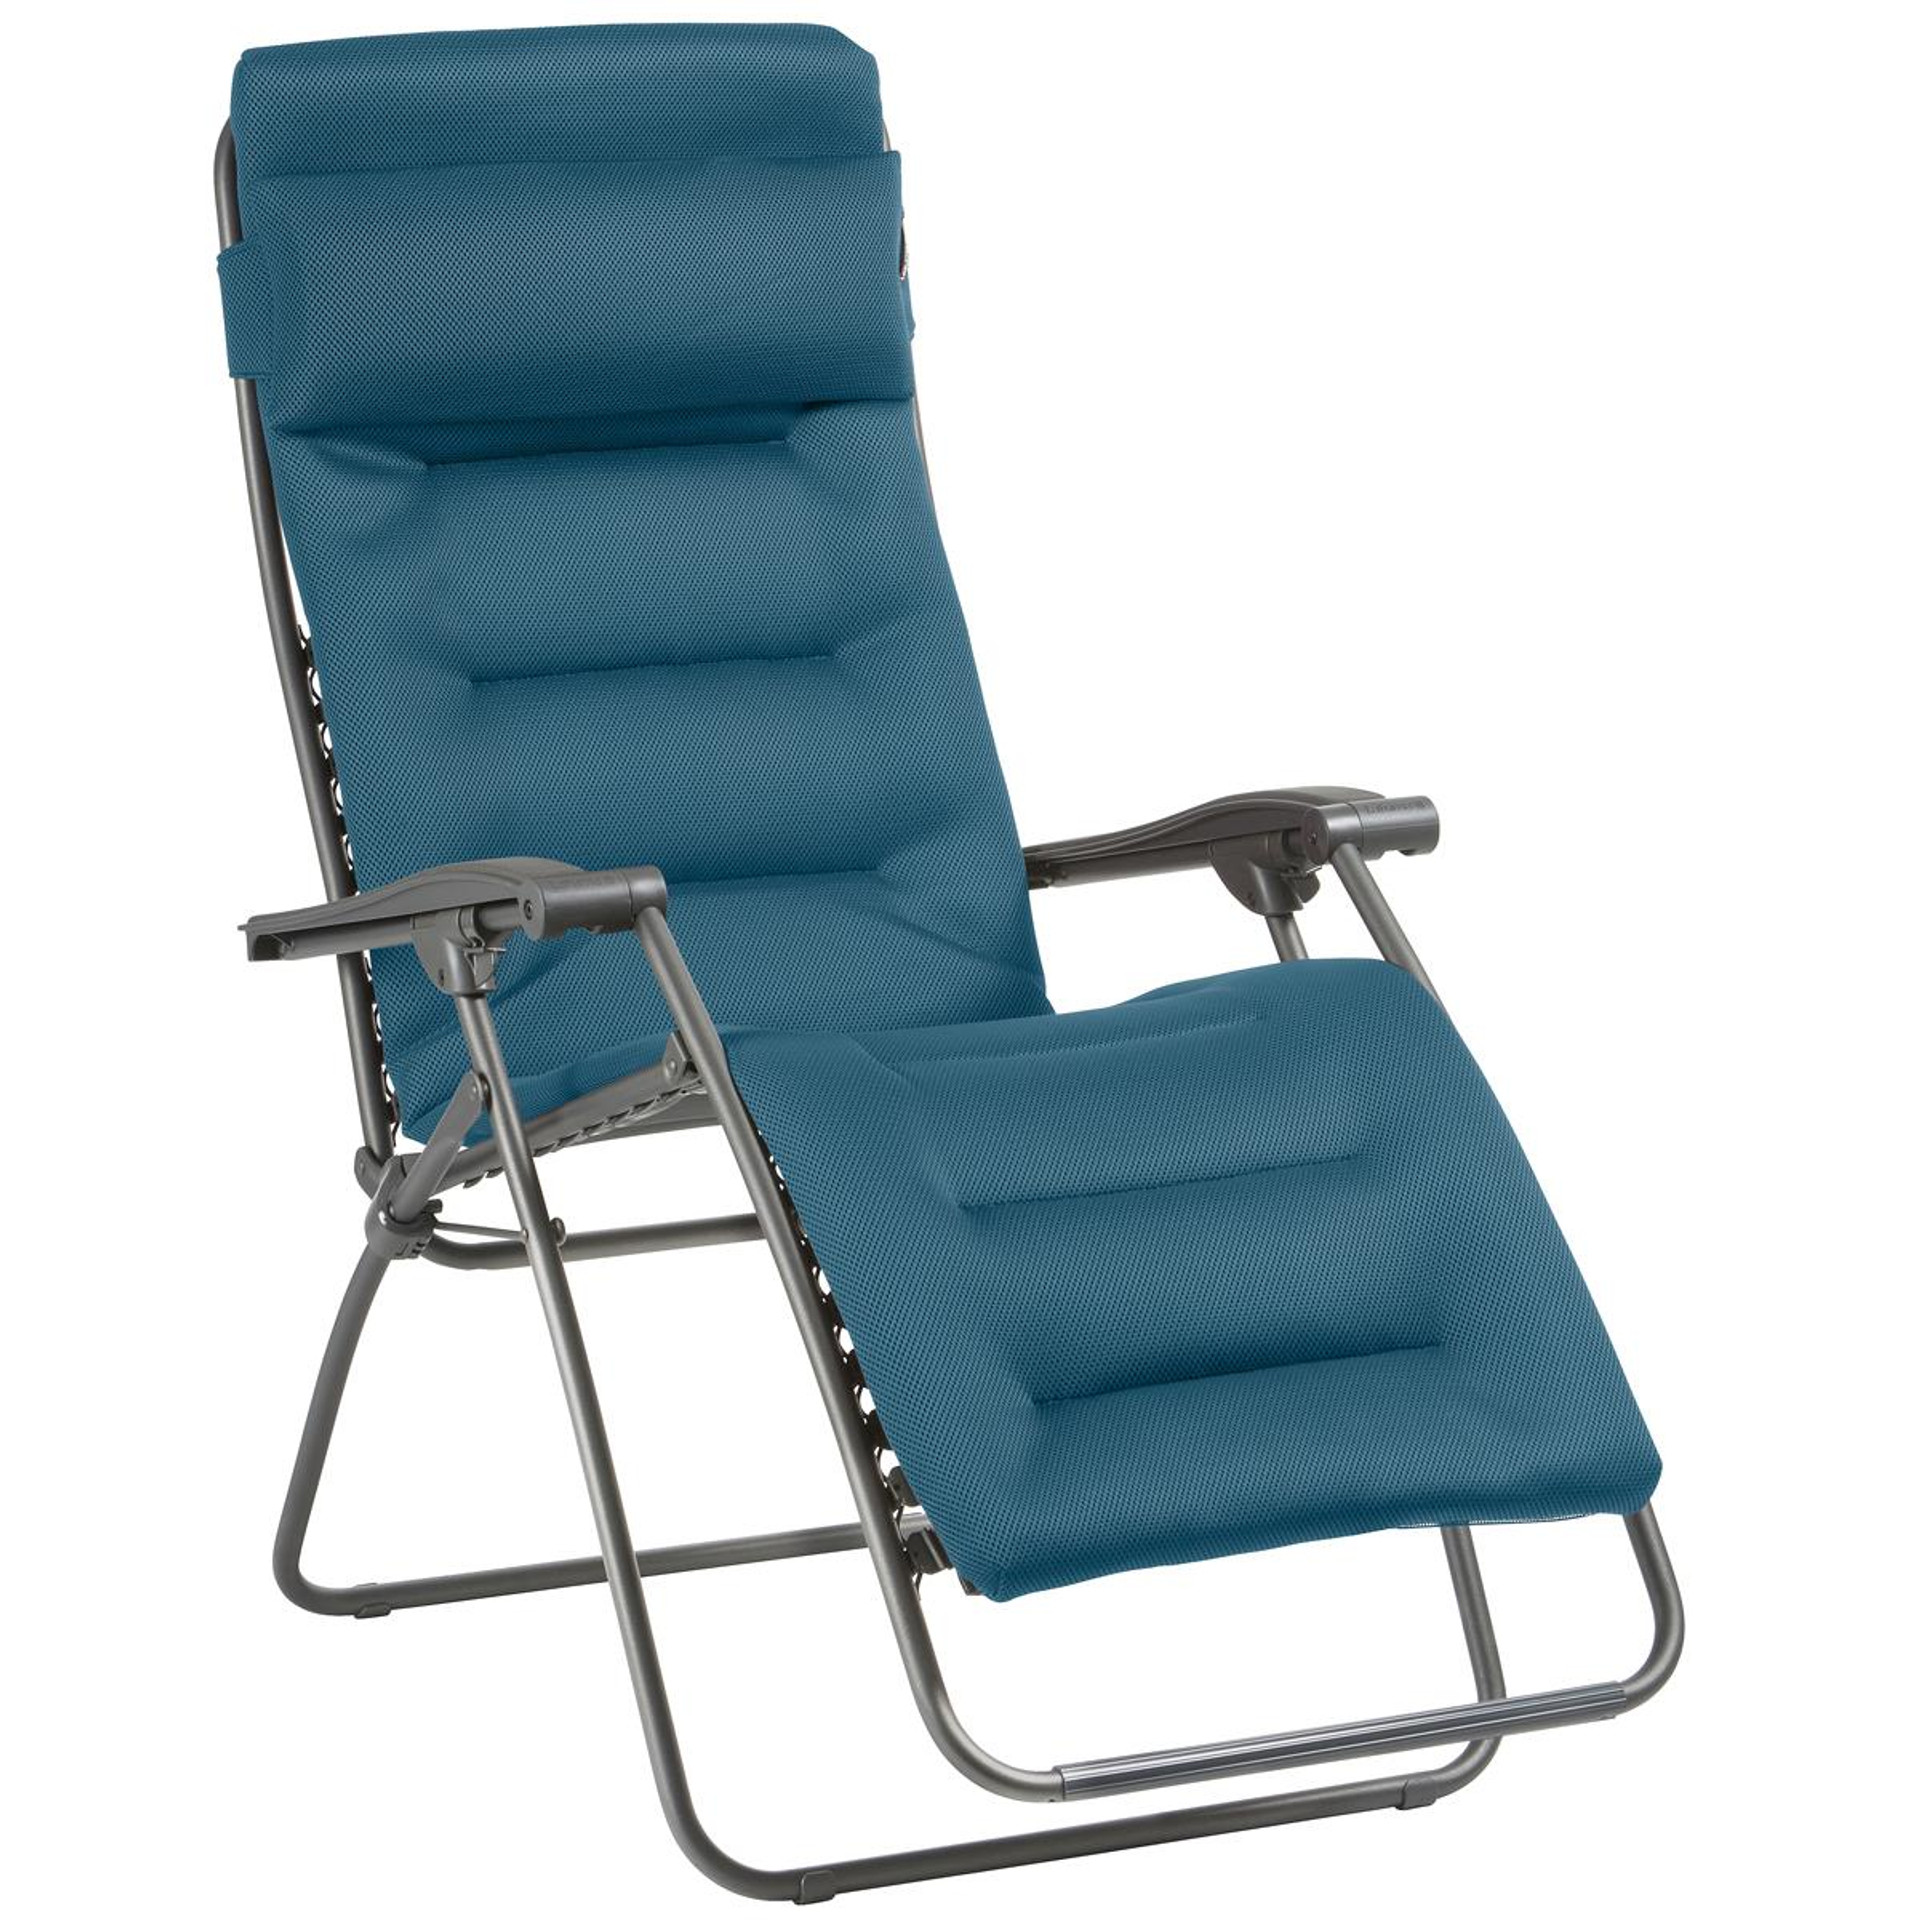 Lafuma Recliners, Chairs and Products | Philip Morris